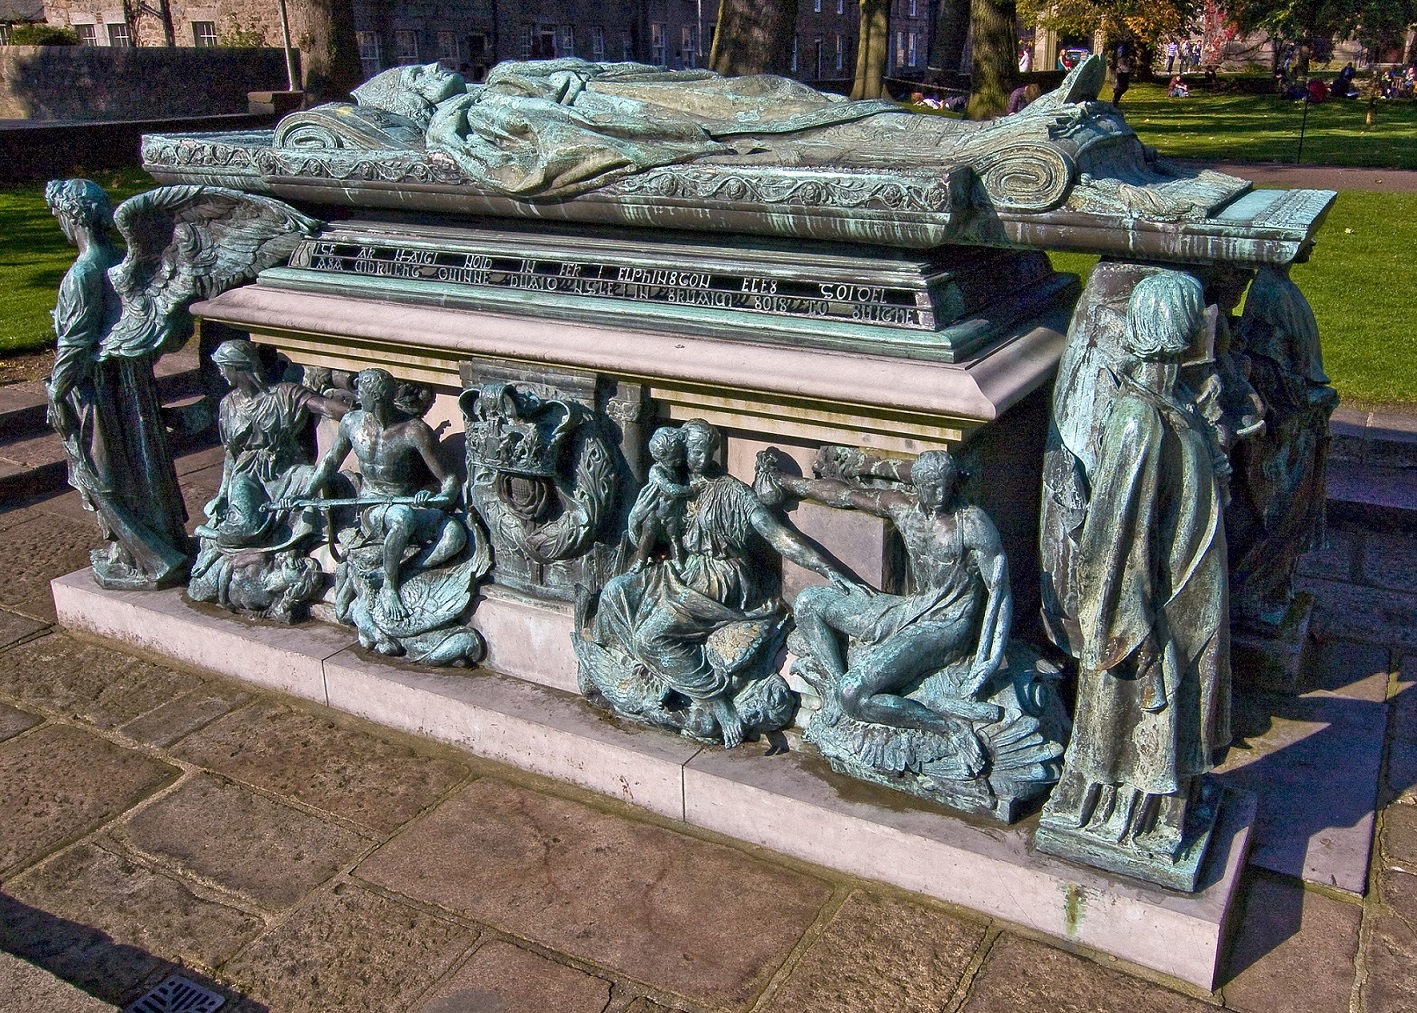 The Elphinstone tomb, Henry Wilson, modelled and cast bronze, c.1910. ©Alan Findlay 